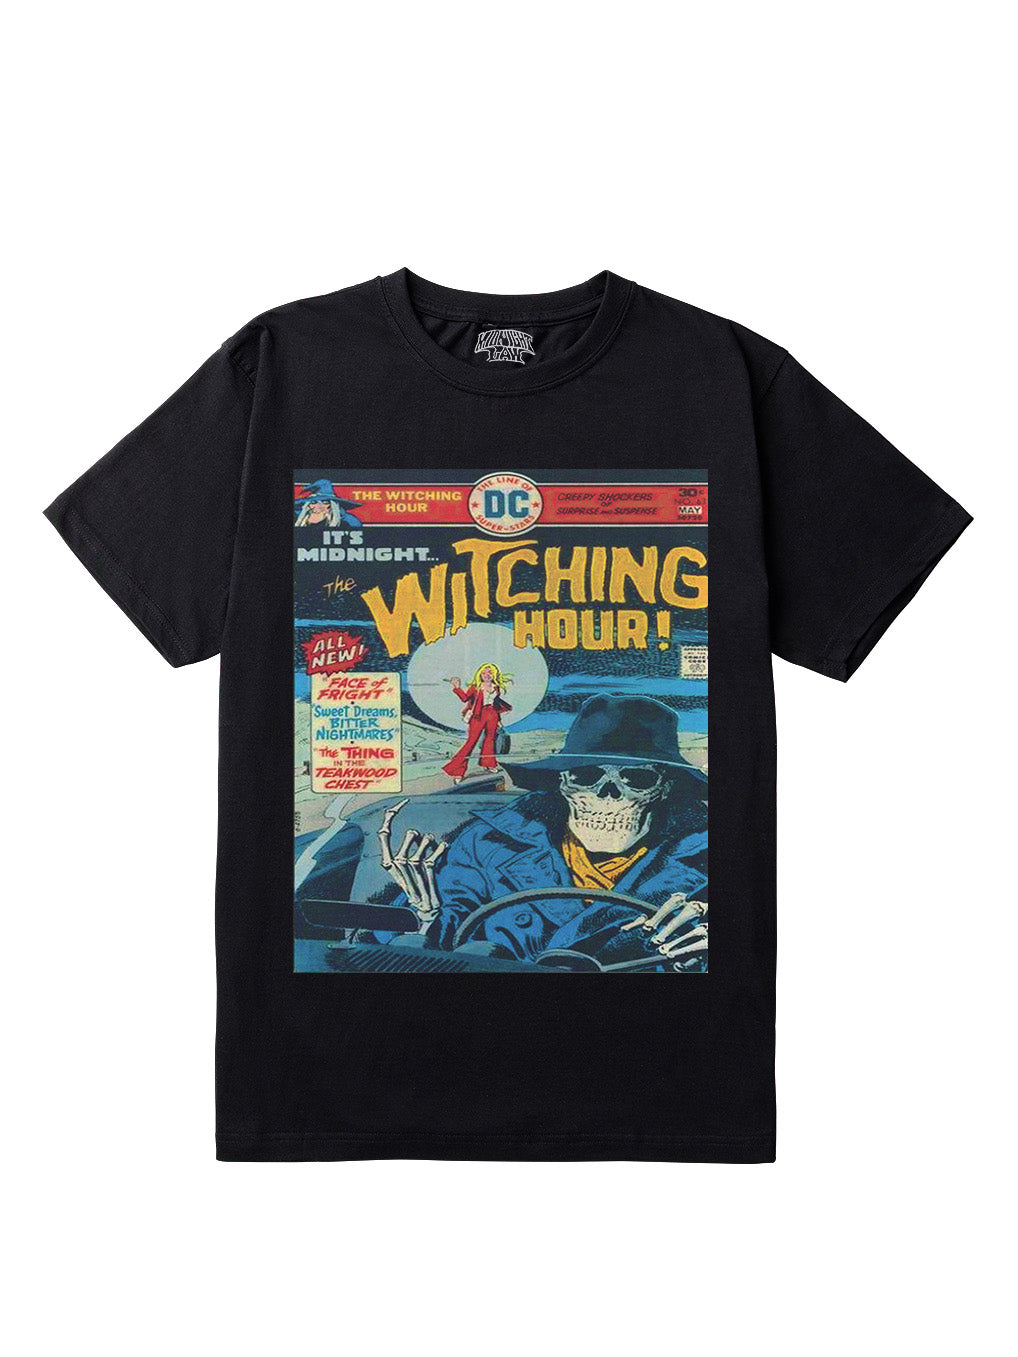 Witching Hour T-Shirt